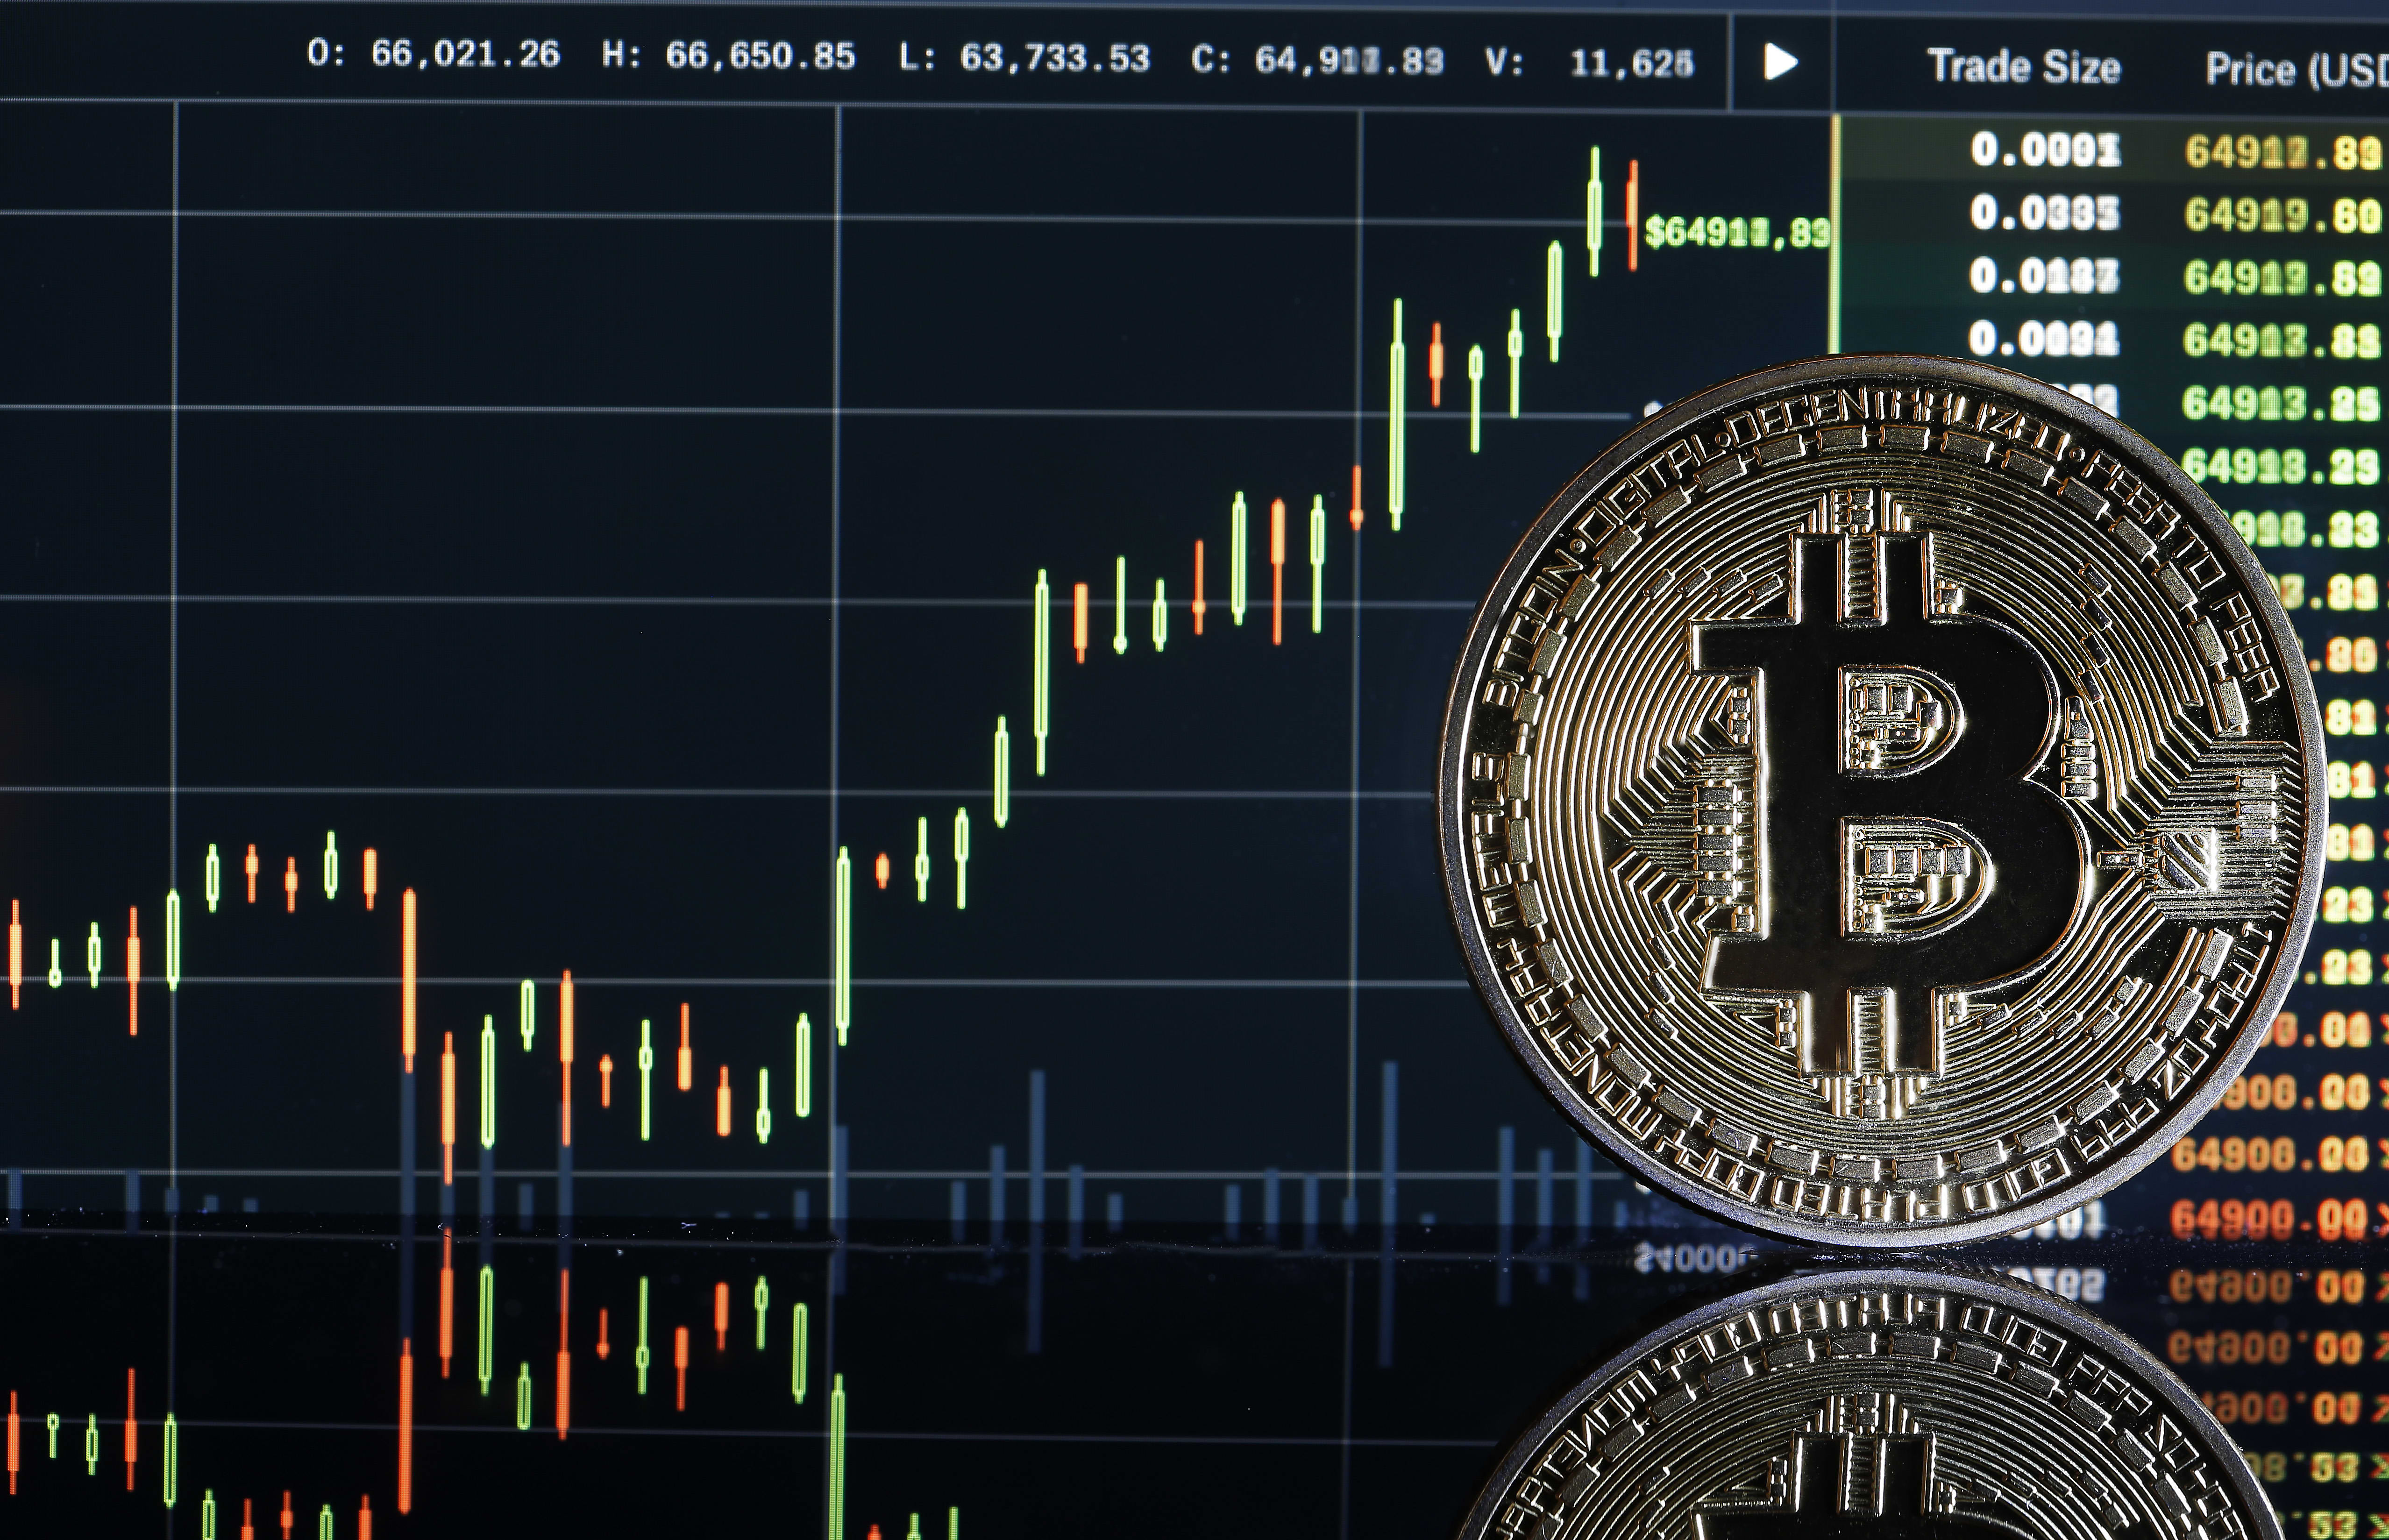 What first bitcoin futures ETF means for cryptocurrency industry